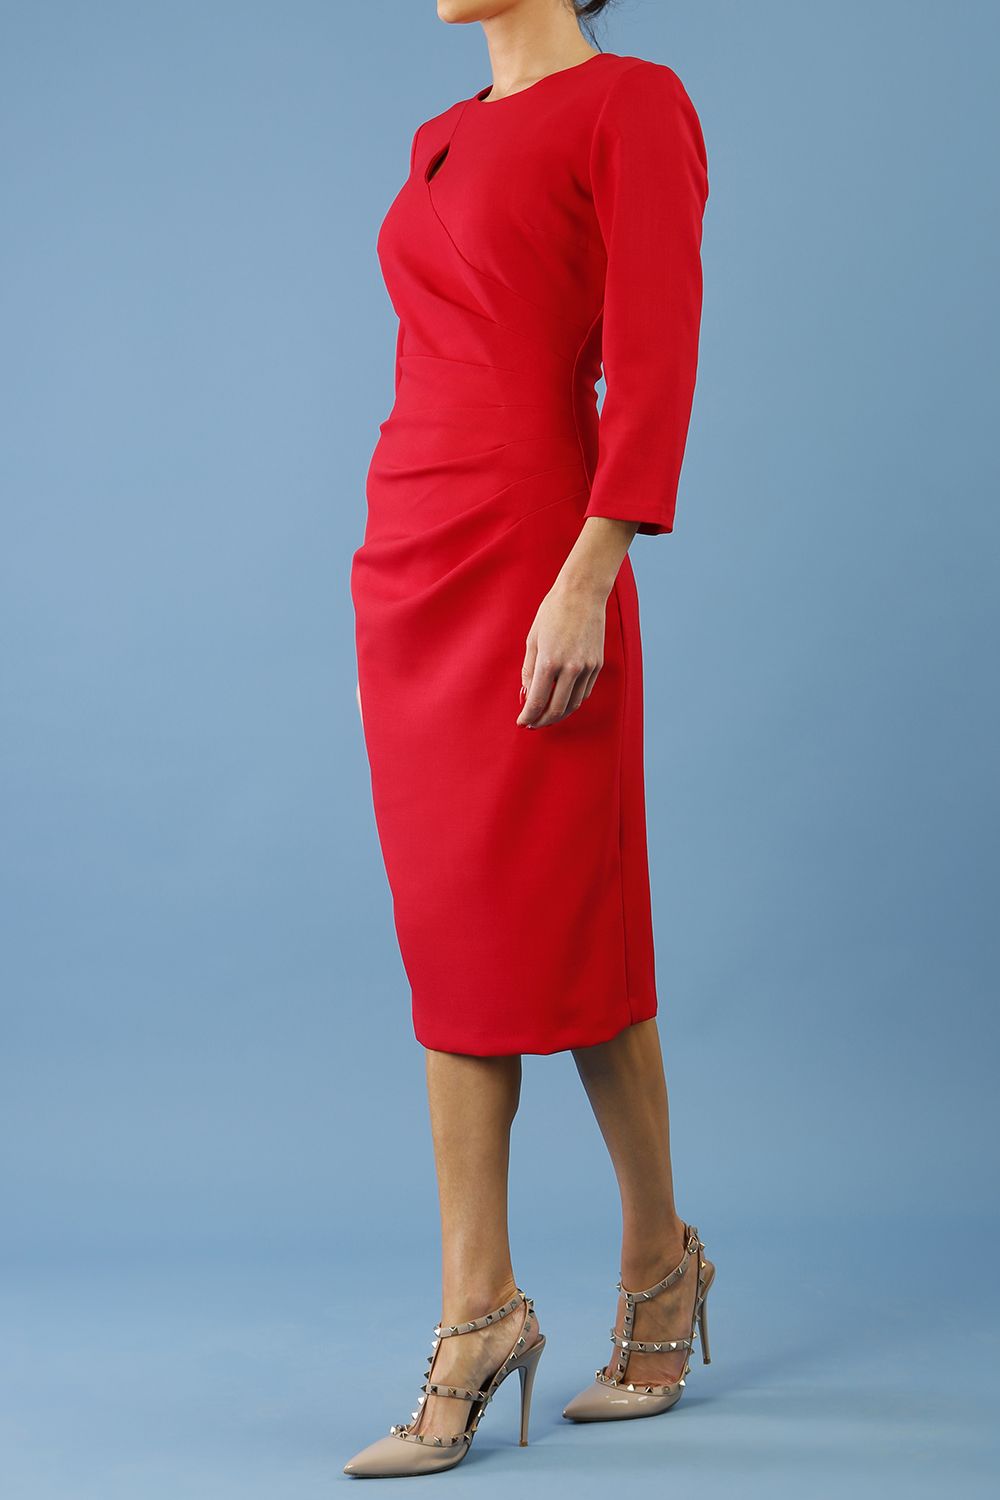 model is wearing diva catwalk miracle pencil dress with keyhole detail on a side of the front panel and gathering detail on a side or bodice panel with sleeves in scarlet red colour side